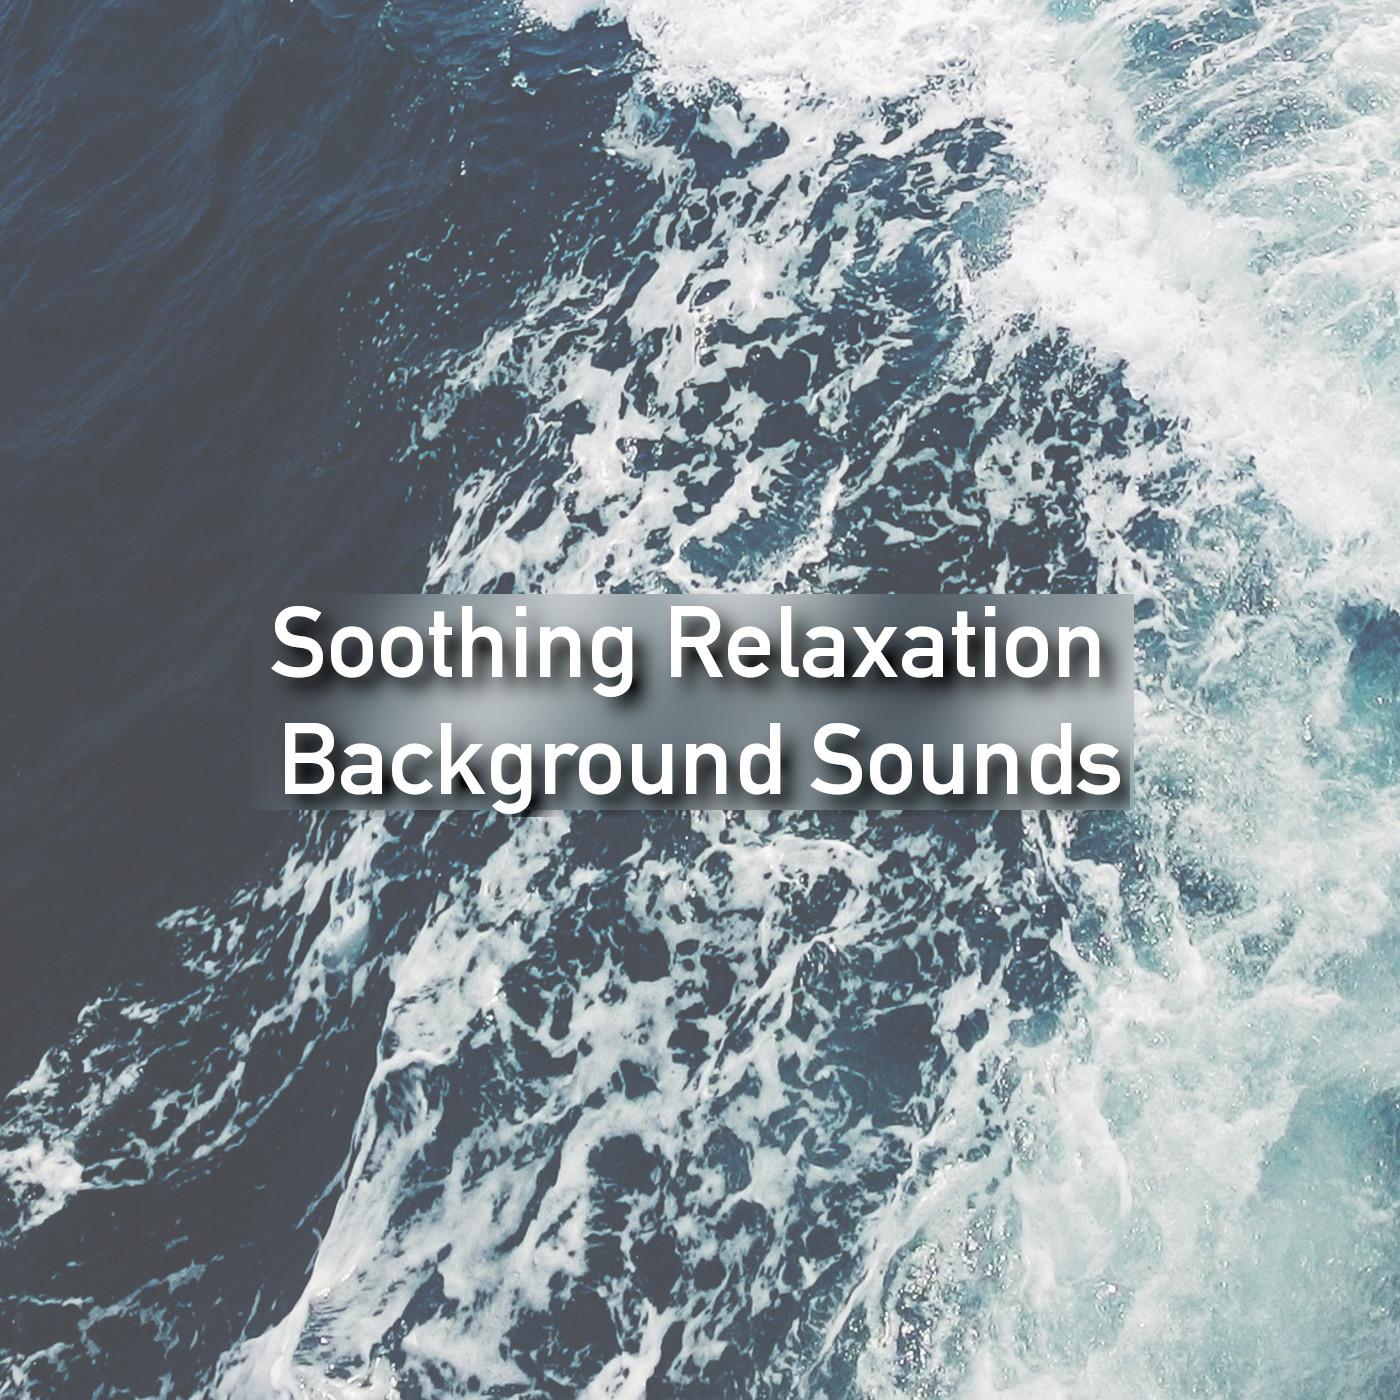 Soothing Relaxation Background Sounds